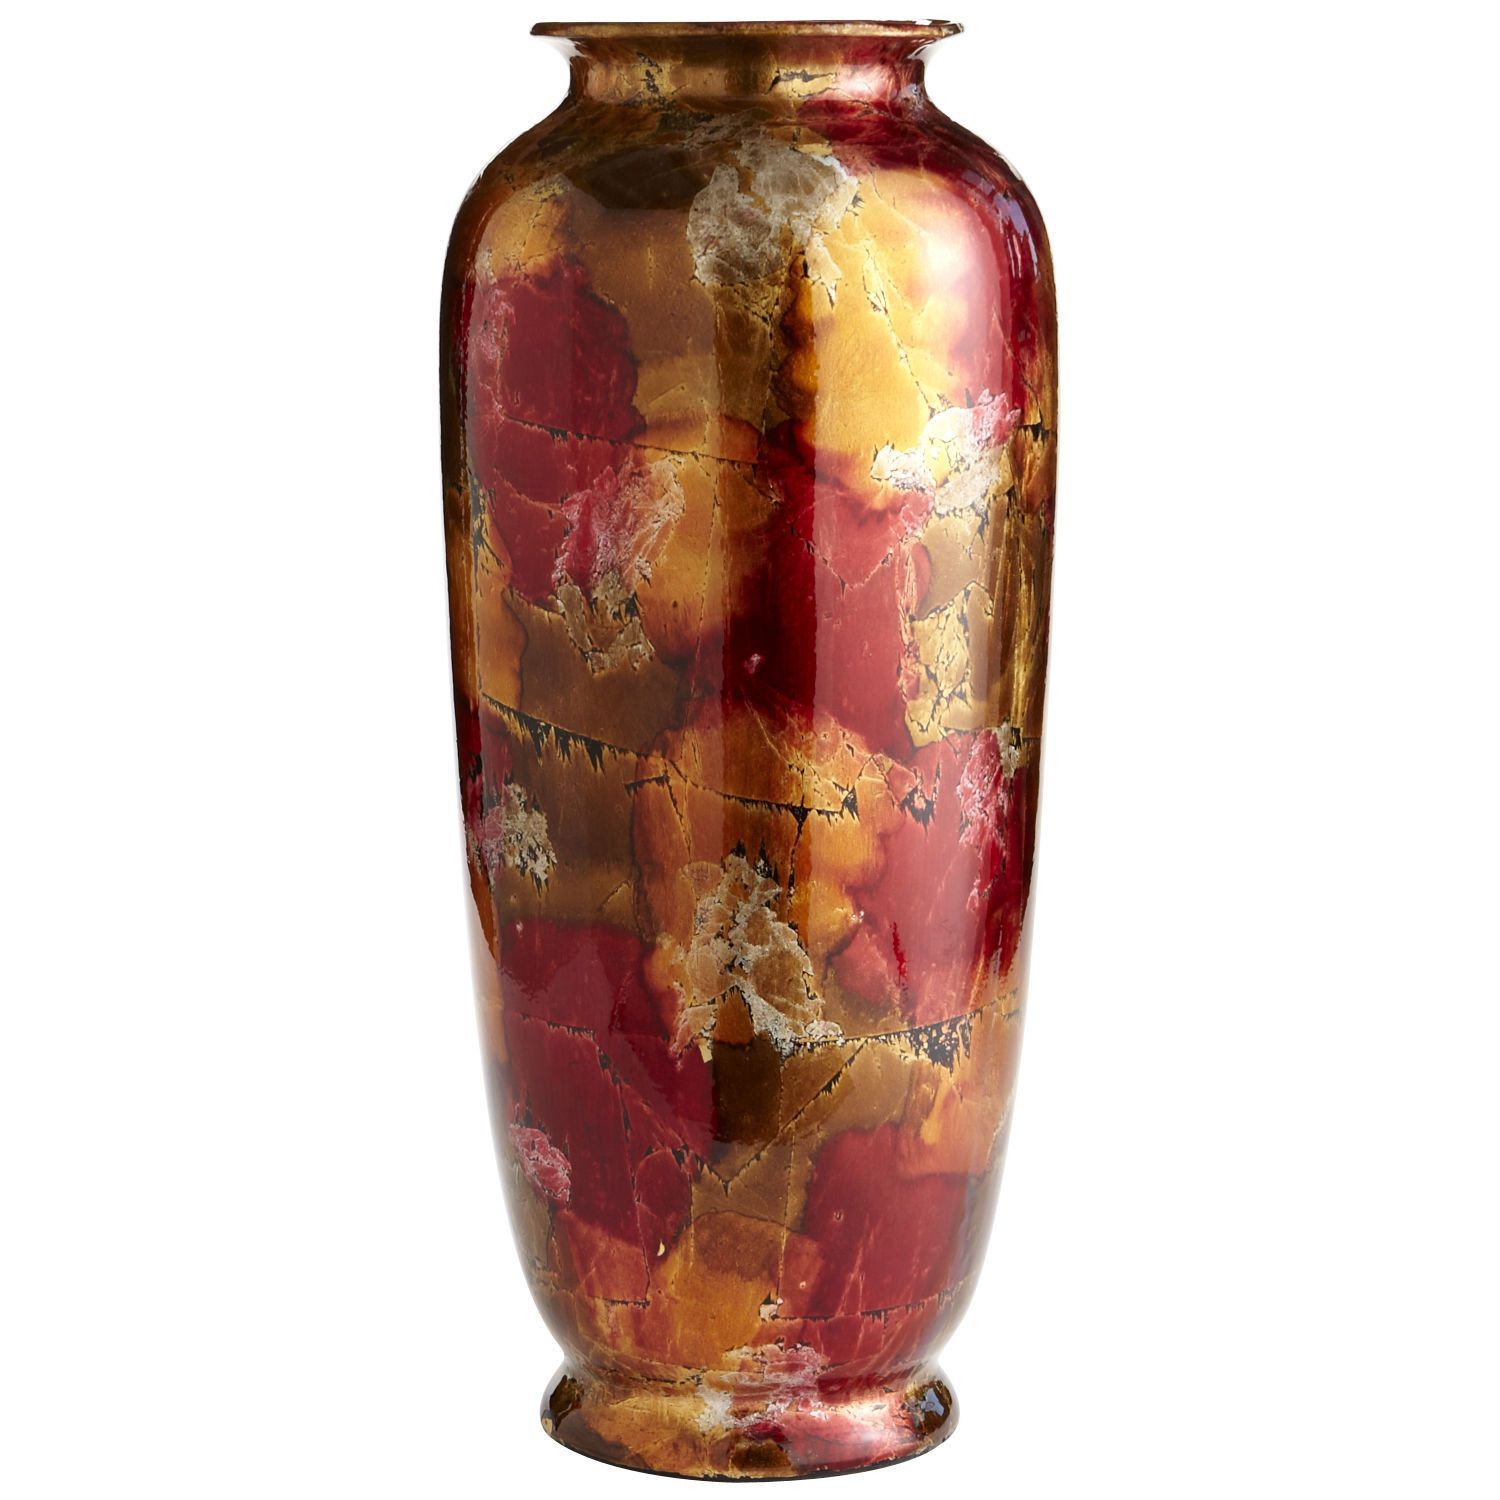 29 Recommended Red Glass Vases and Bowls 2022 free download red glass vases and bowls of red gold foil ceramic vase home pinterest red gold ceramic inside red gold foil ceramic vase